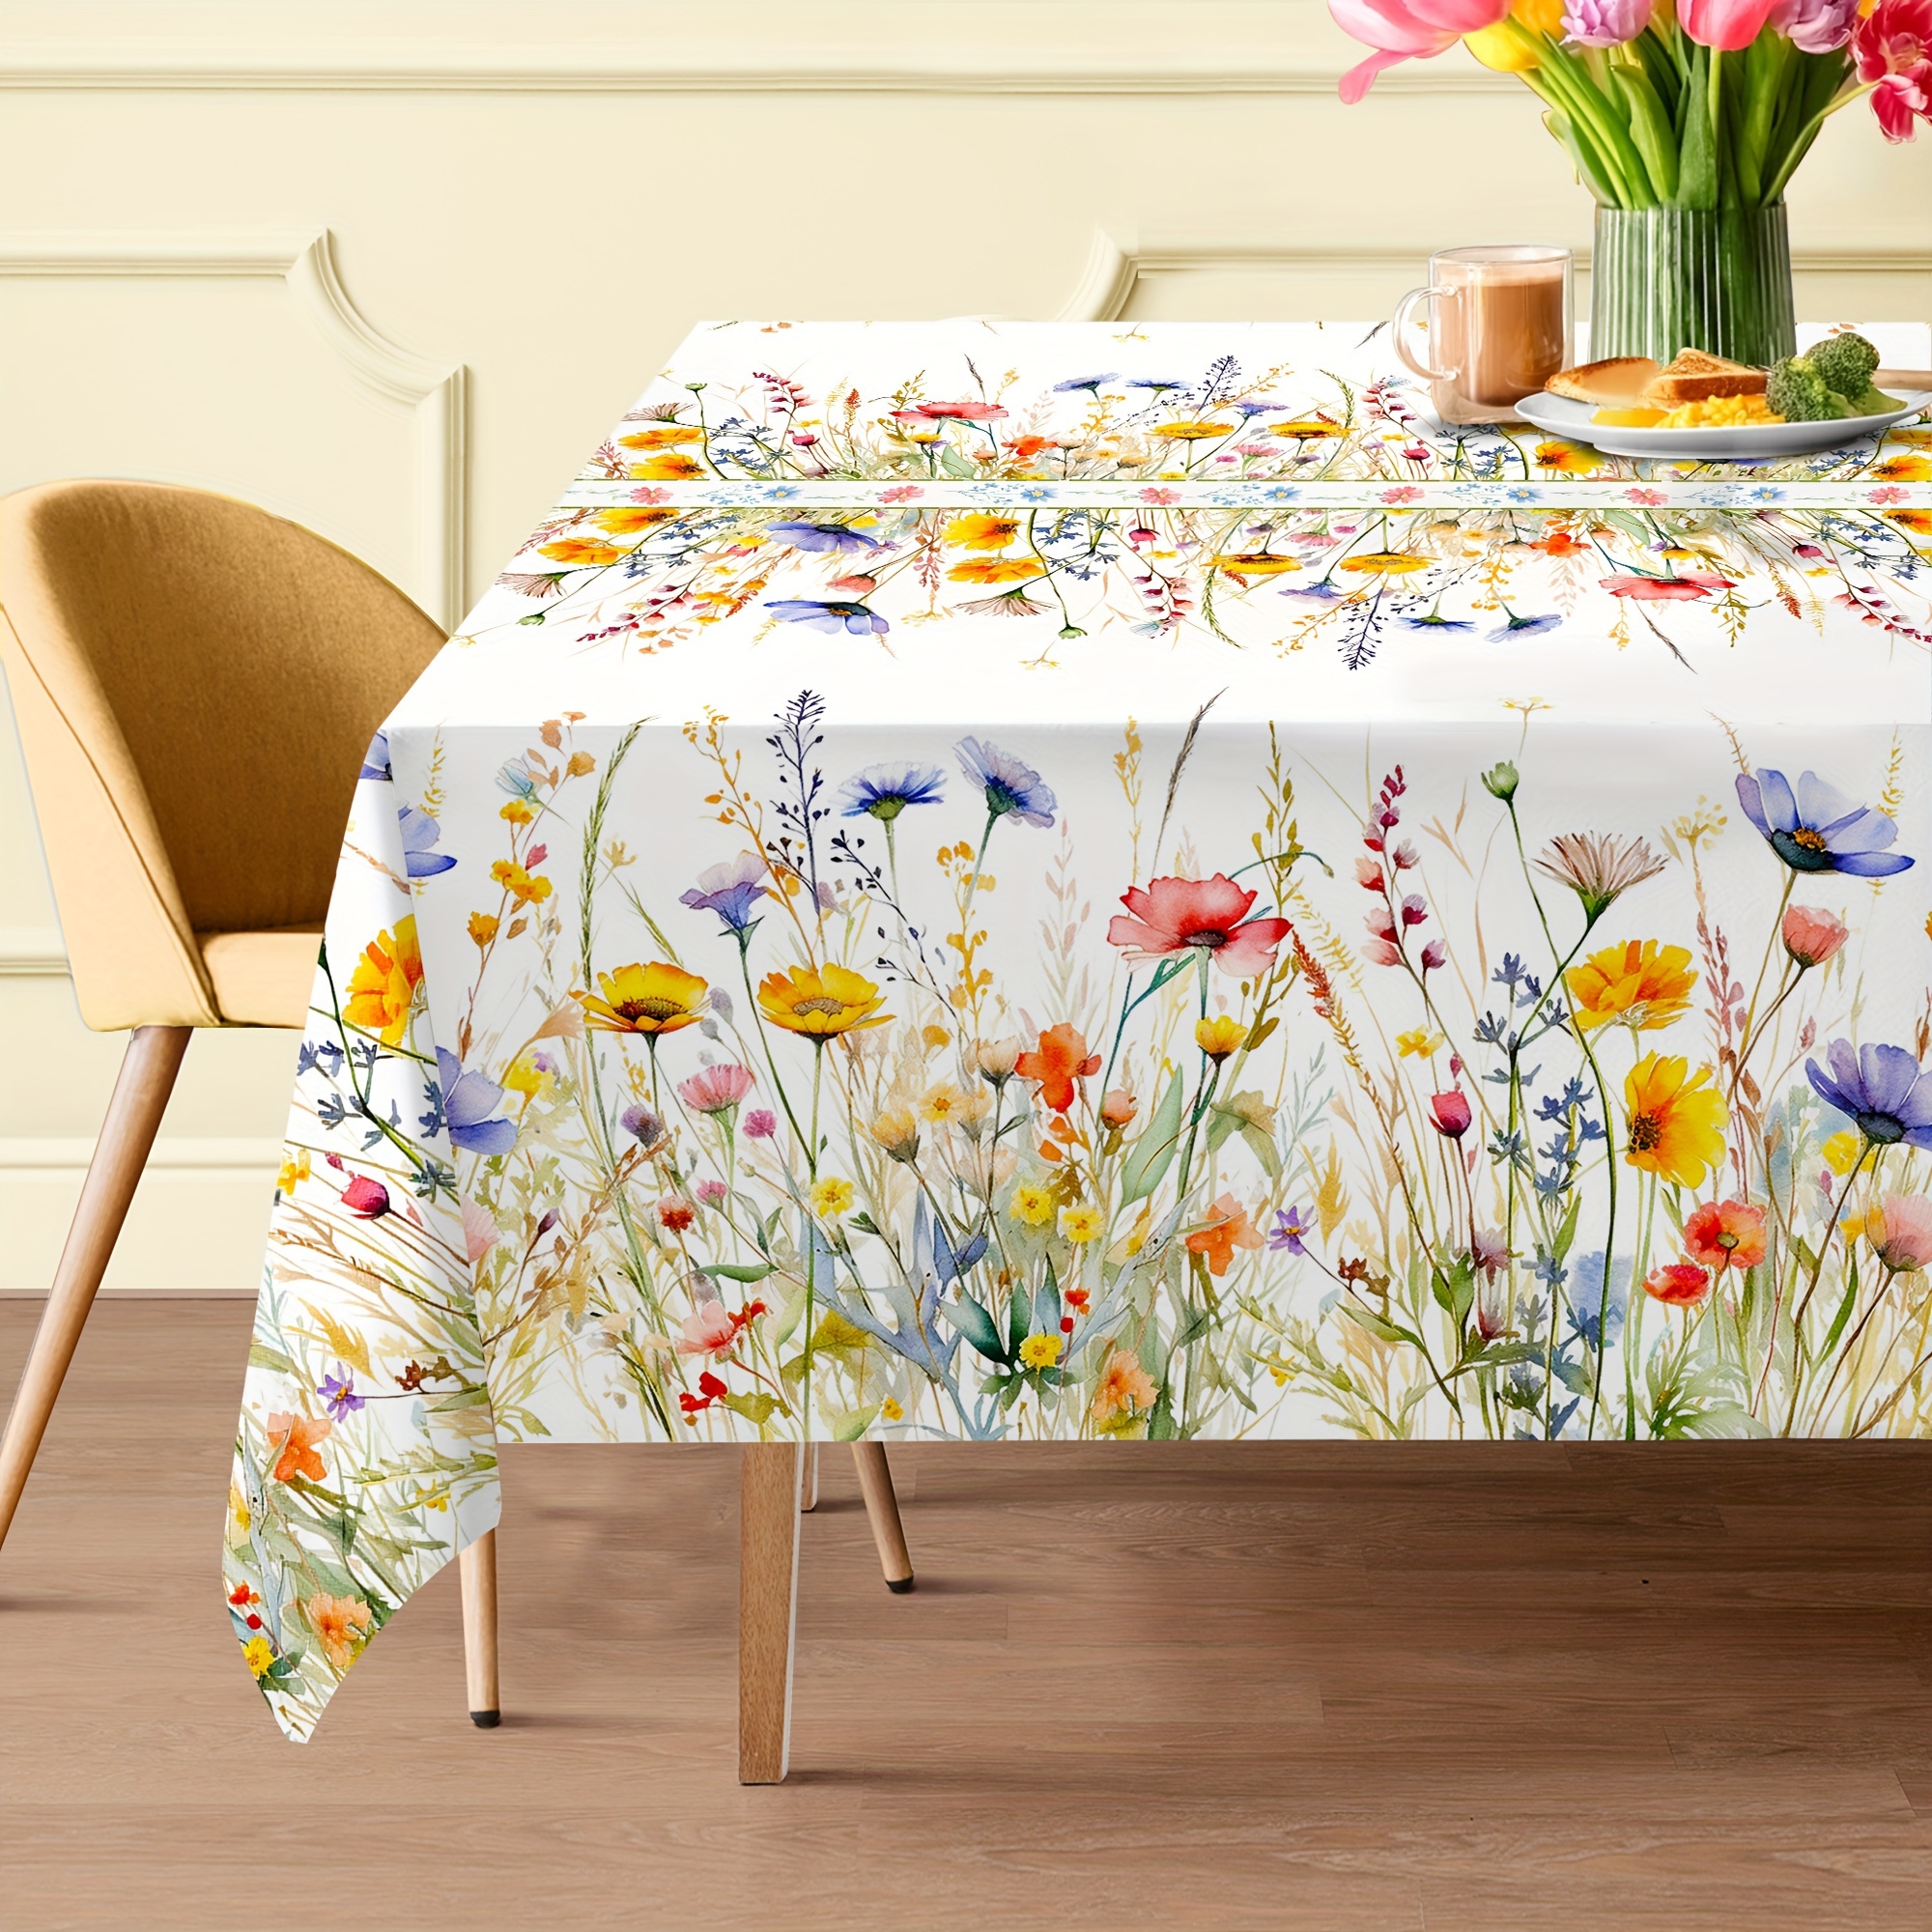 

1pc, Tablecloth, Watercolor Floral Small Fresh Style Pastoral Wheat Design Table Decor, Rectangle Spring Theme Seasonal Table Cover, For Picnic Or Holiday Party, Room Decor